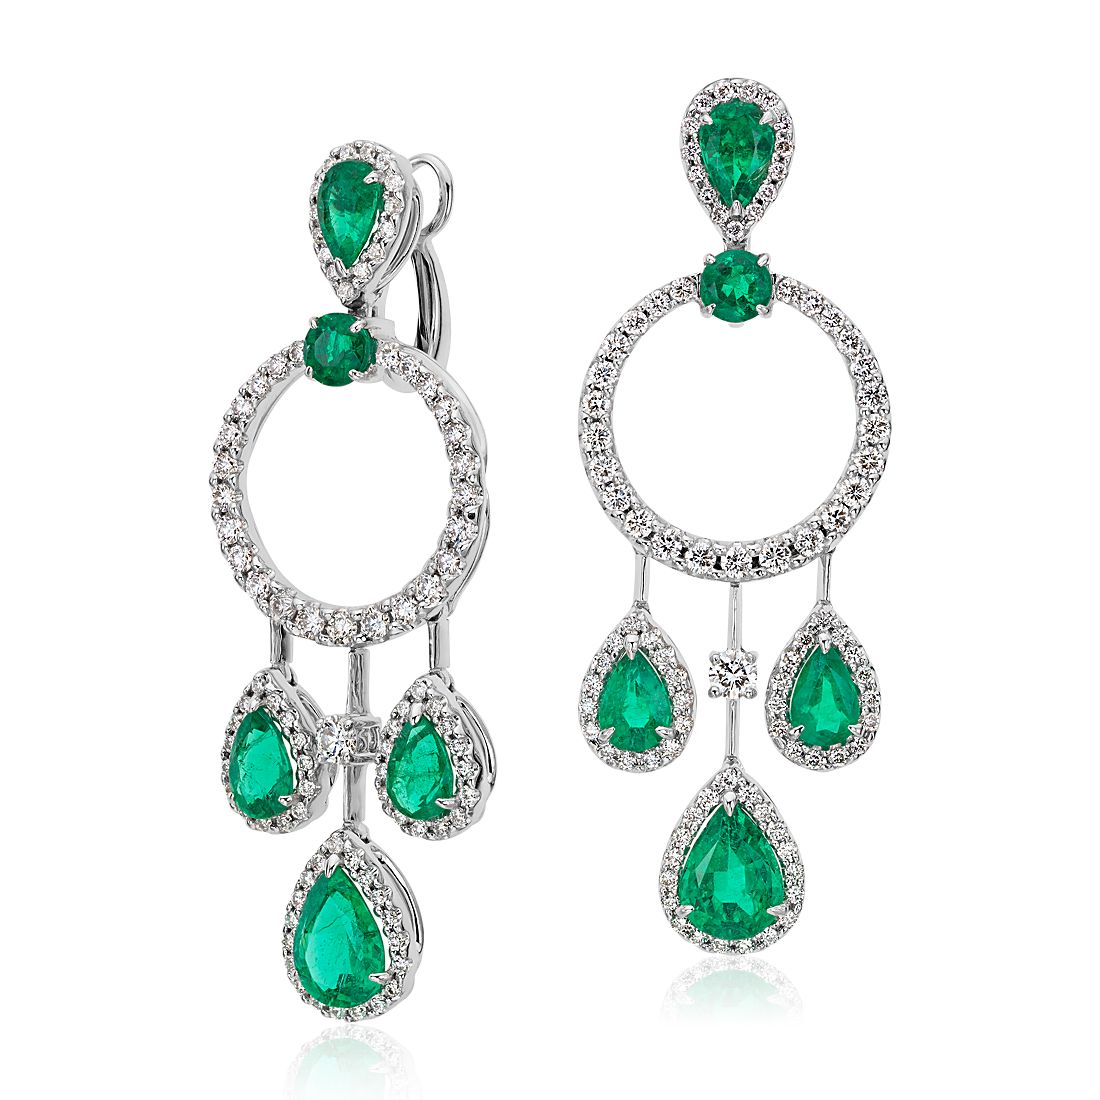 Pear Shape Emerald and Diamond Drop Earrings in 18k White Gold (4.41 ct. tw.)